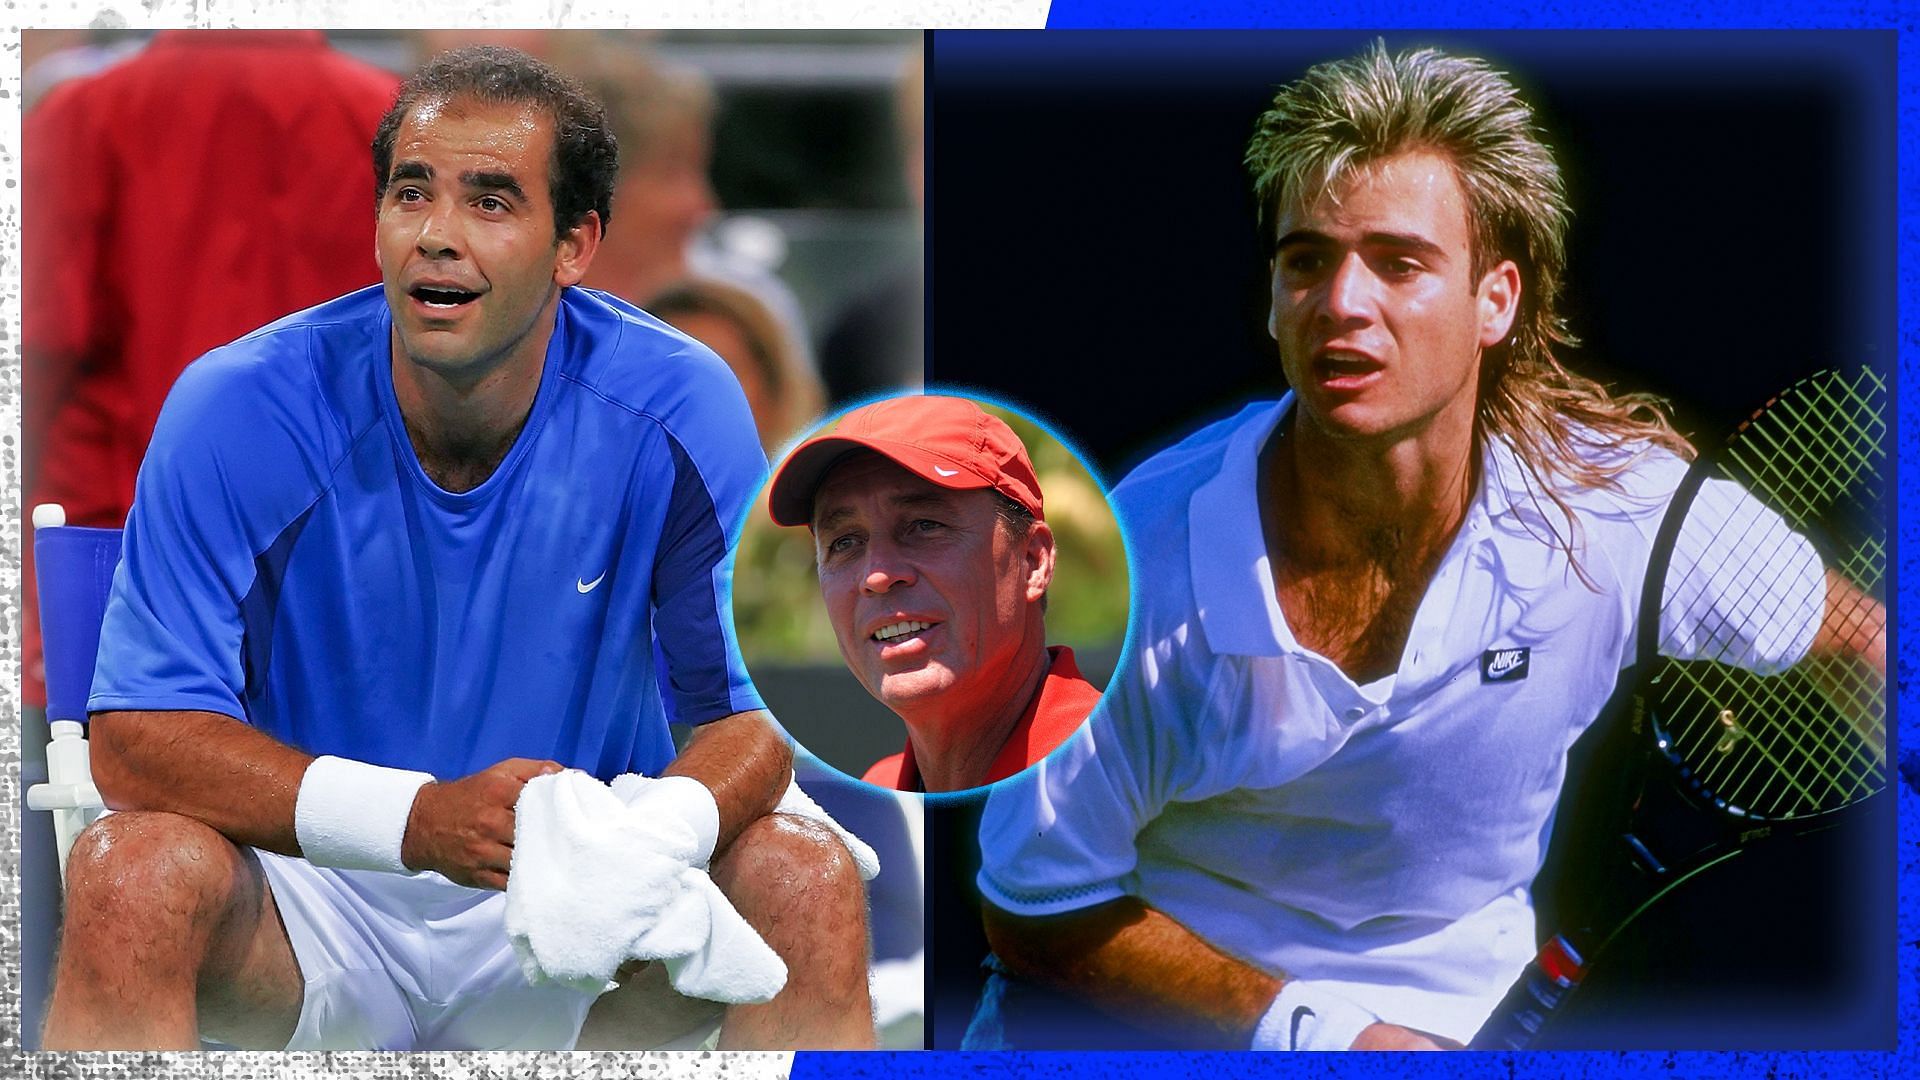 Pete Sampras and Andre Agassi won a total of 22 Majors